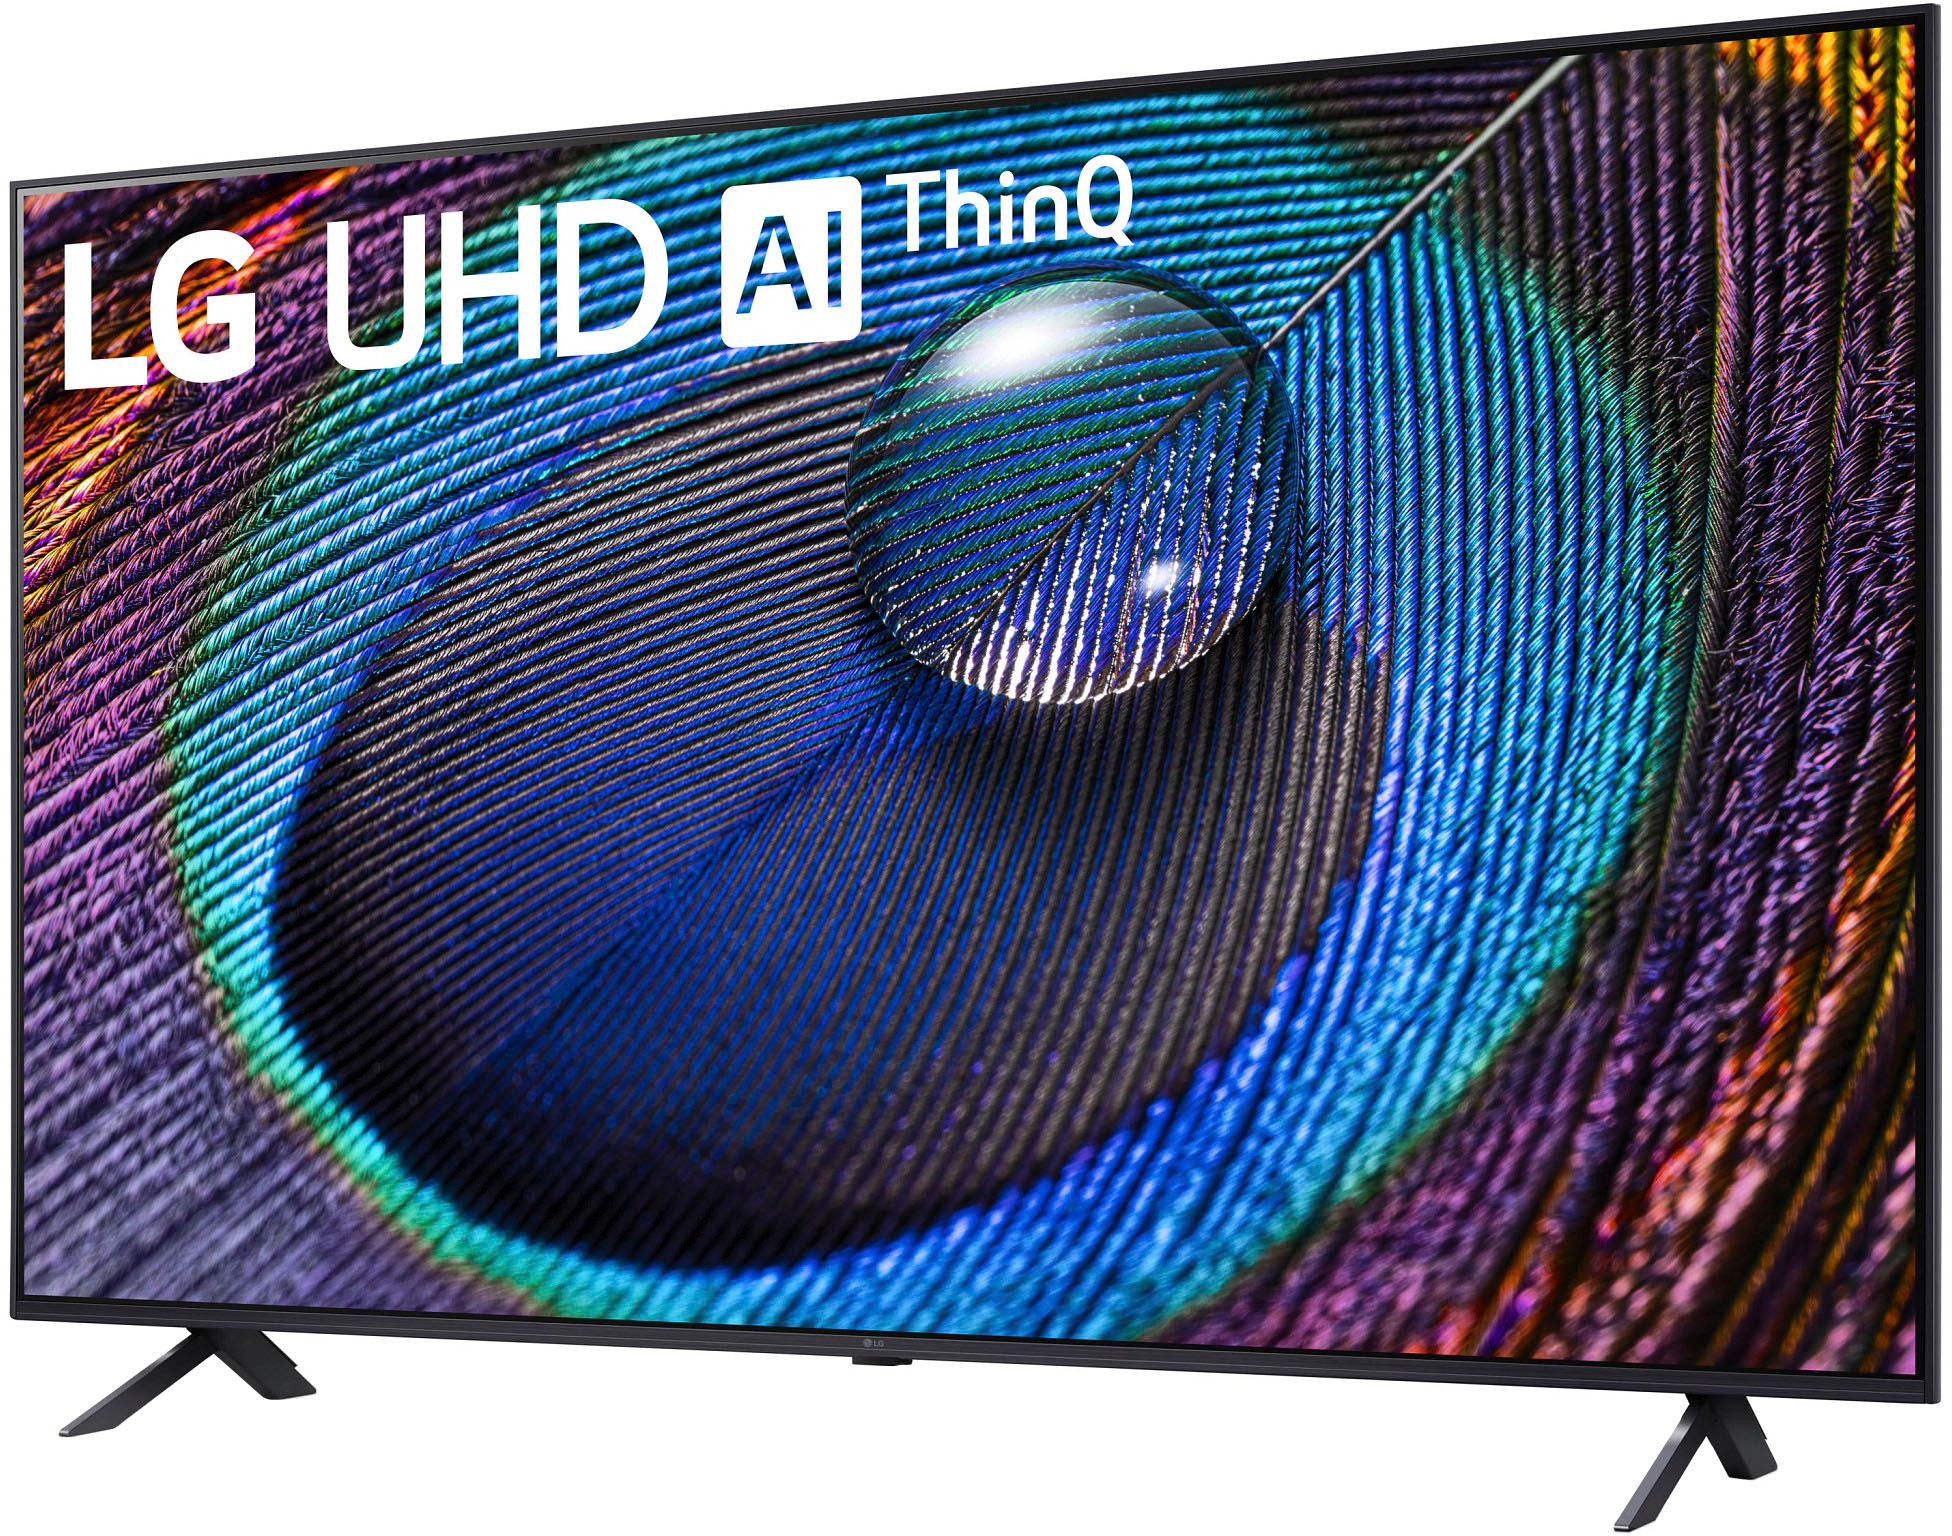 4K TV: LED, Curved, and 3D Ultra HD TVs - Best Buy